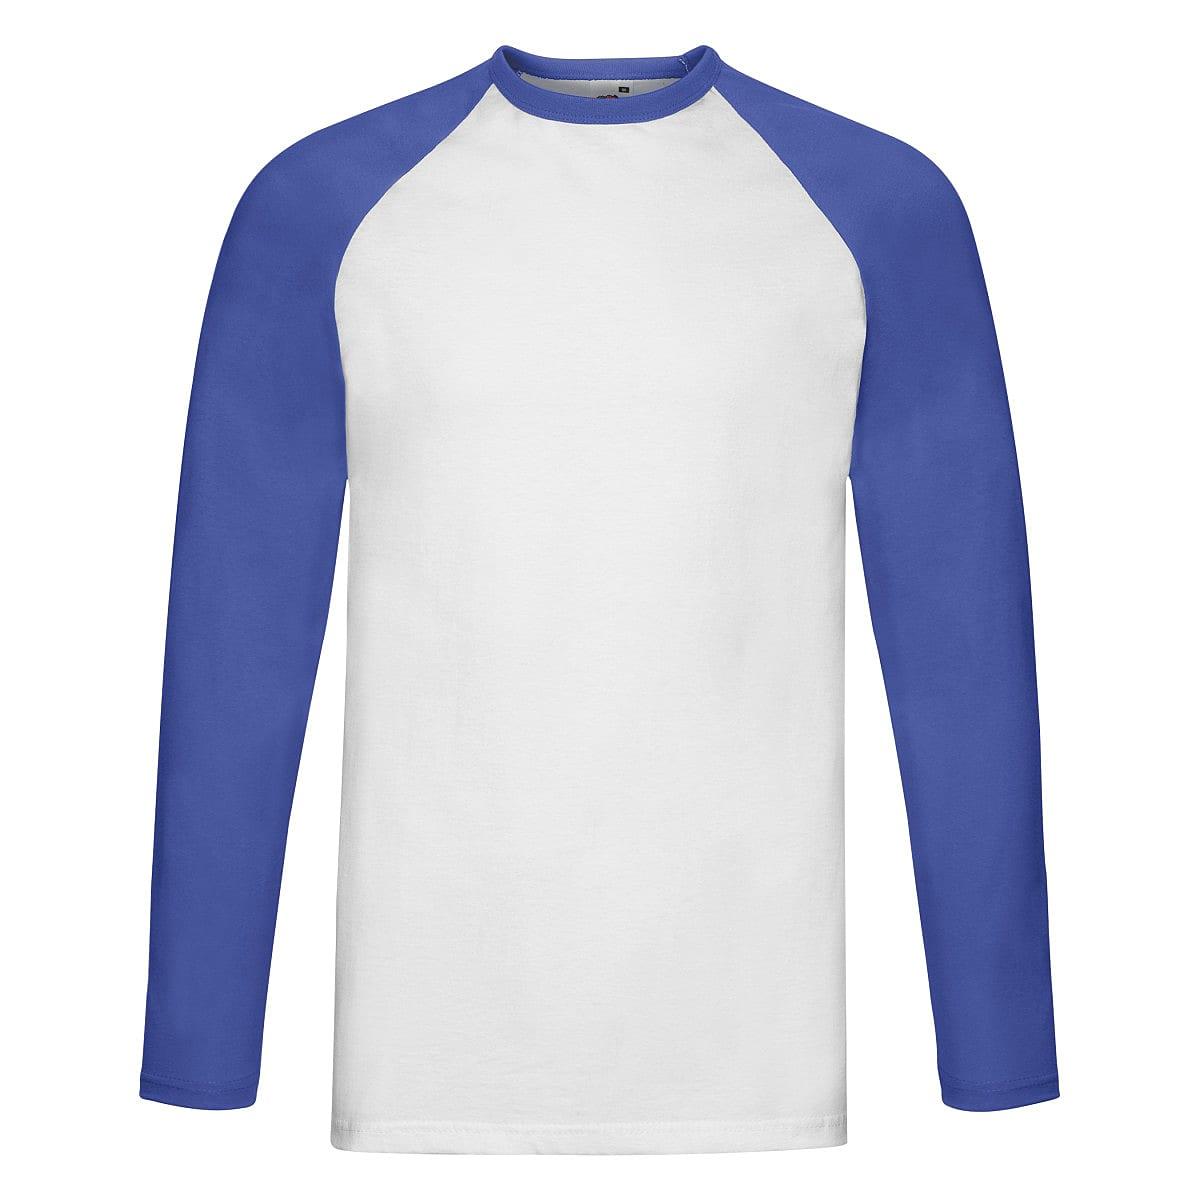 Fruit Of The Loom Long-Sleeve Baseball T-Shirt in White / Royal Blue (Product Code: 61028)